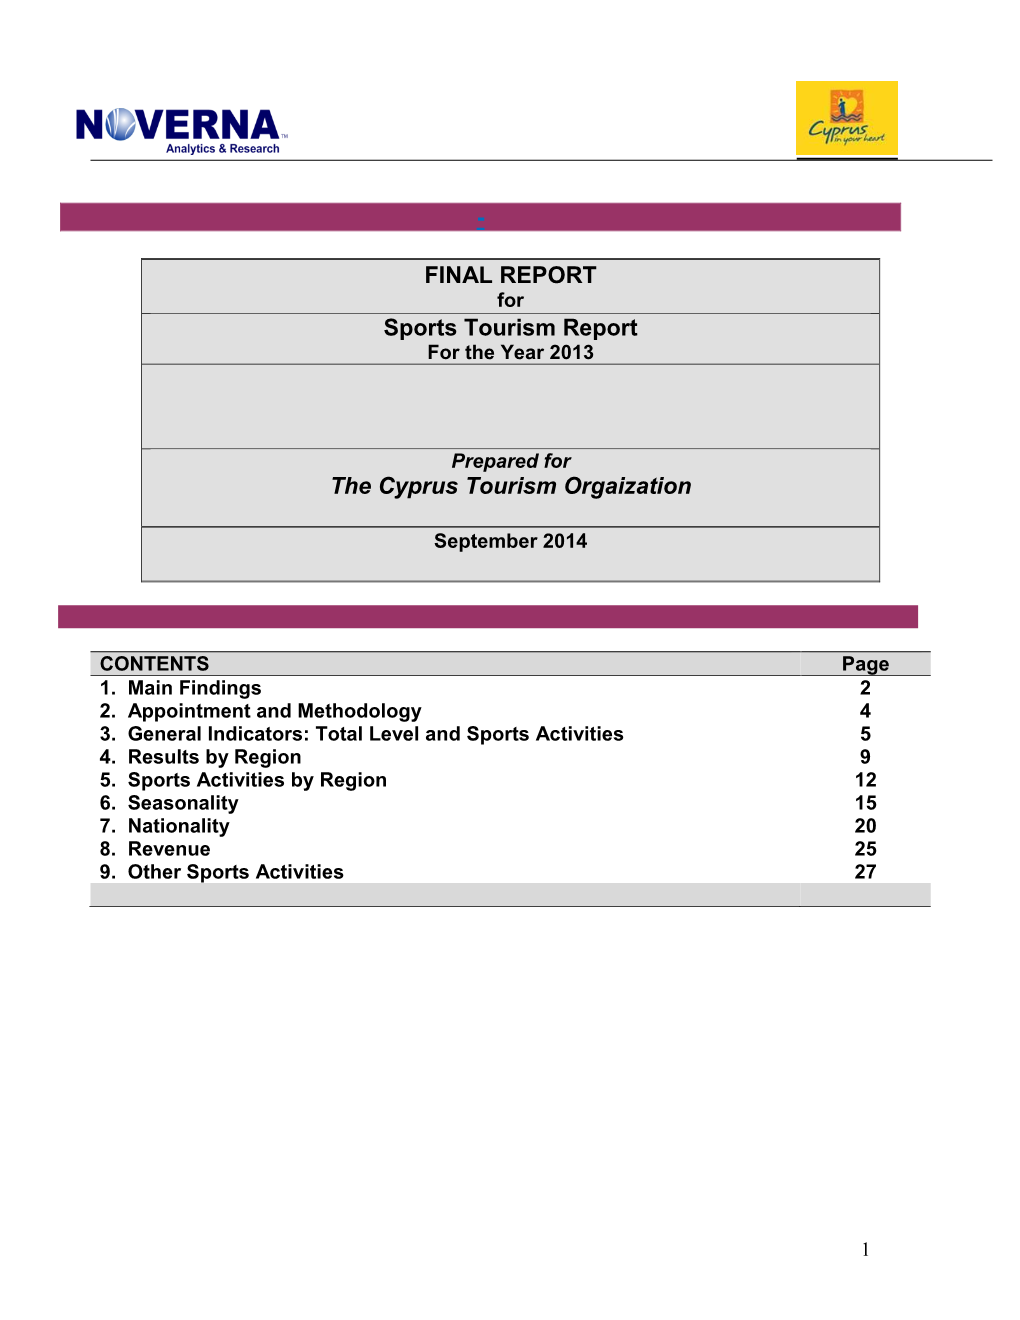 FINAL REPORT Sports Tourism Report the Cyprus Tourism